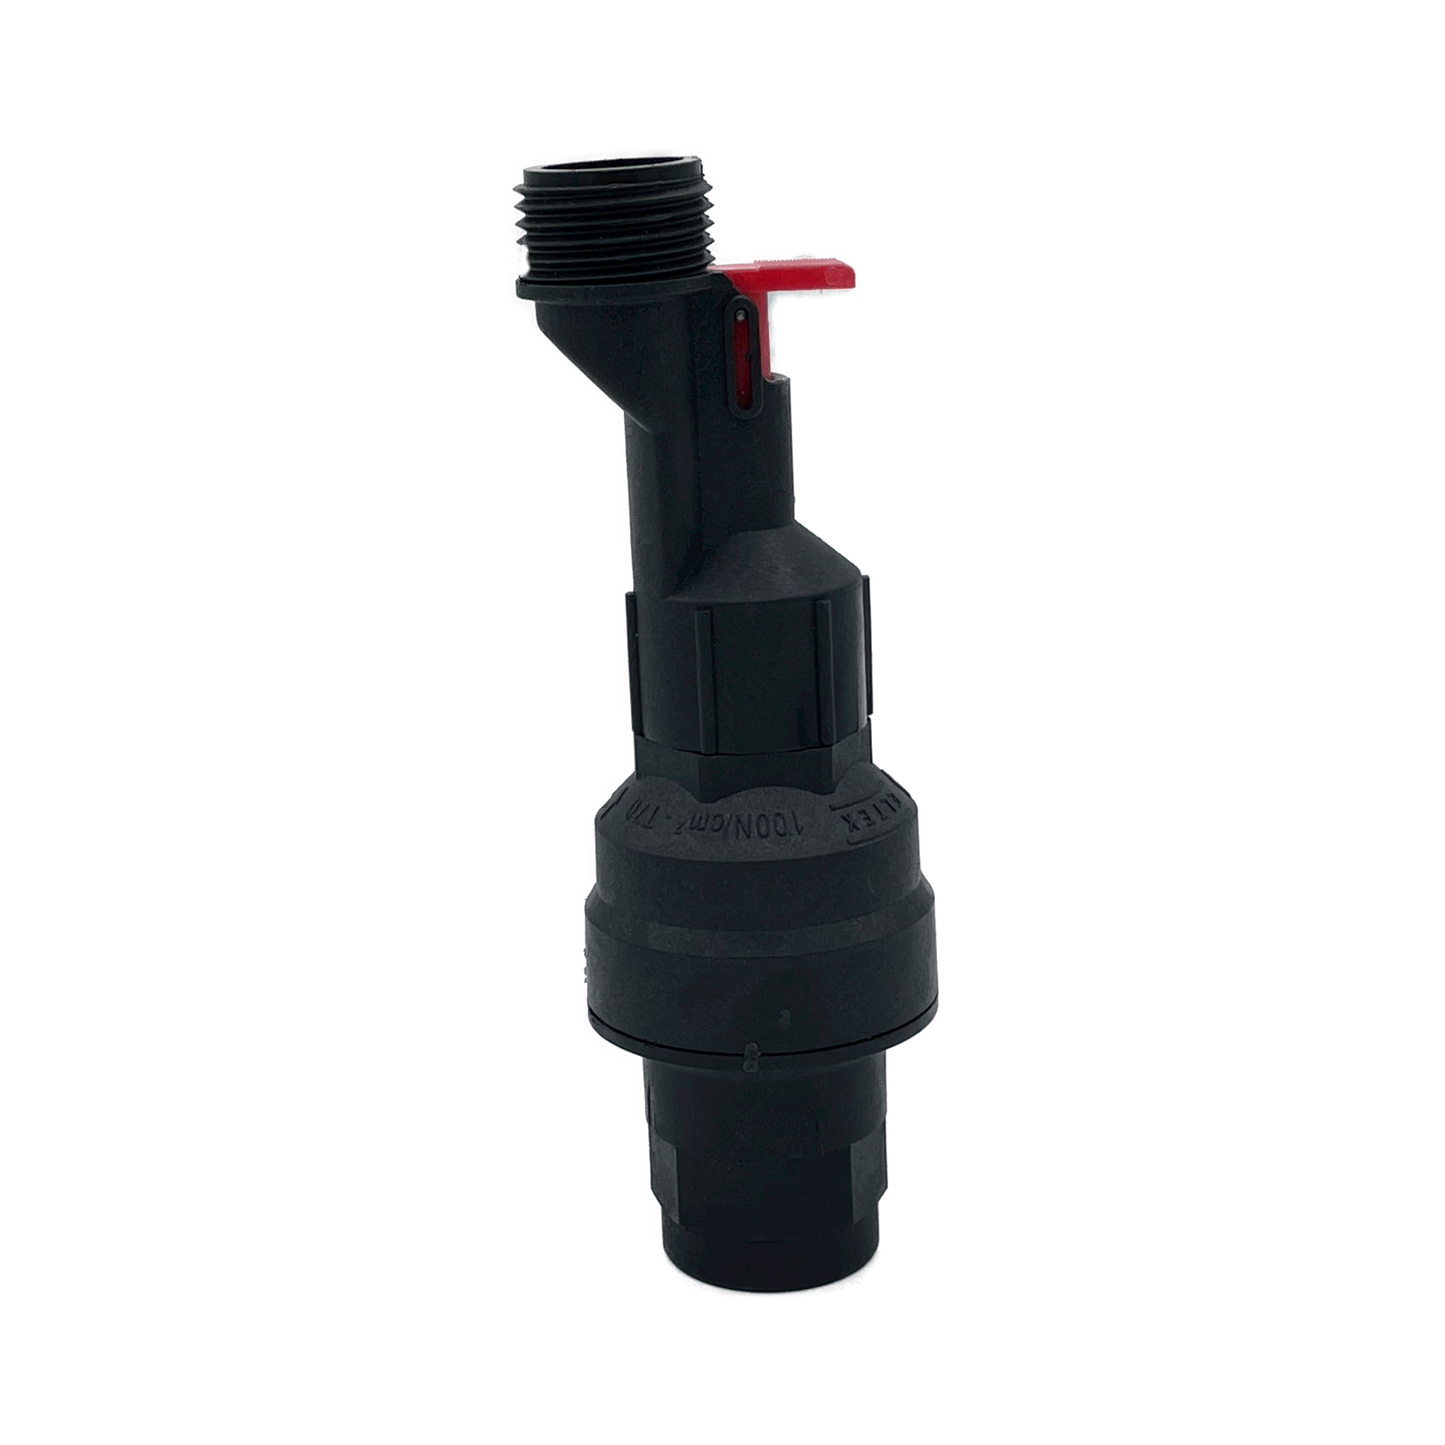 100% mechanical water shutoff valve. Stops leaks and floods. No electric or batteries required. Actually shuts off water rather than being an alarm. Great for properties and locations where water could run a long time without being turned off.